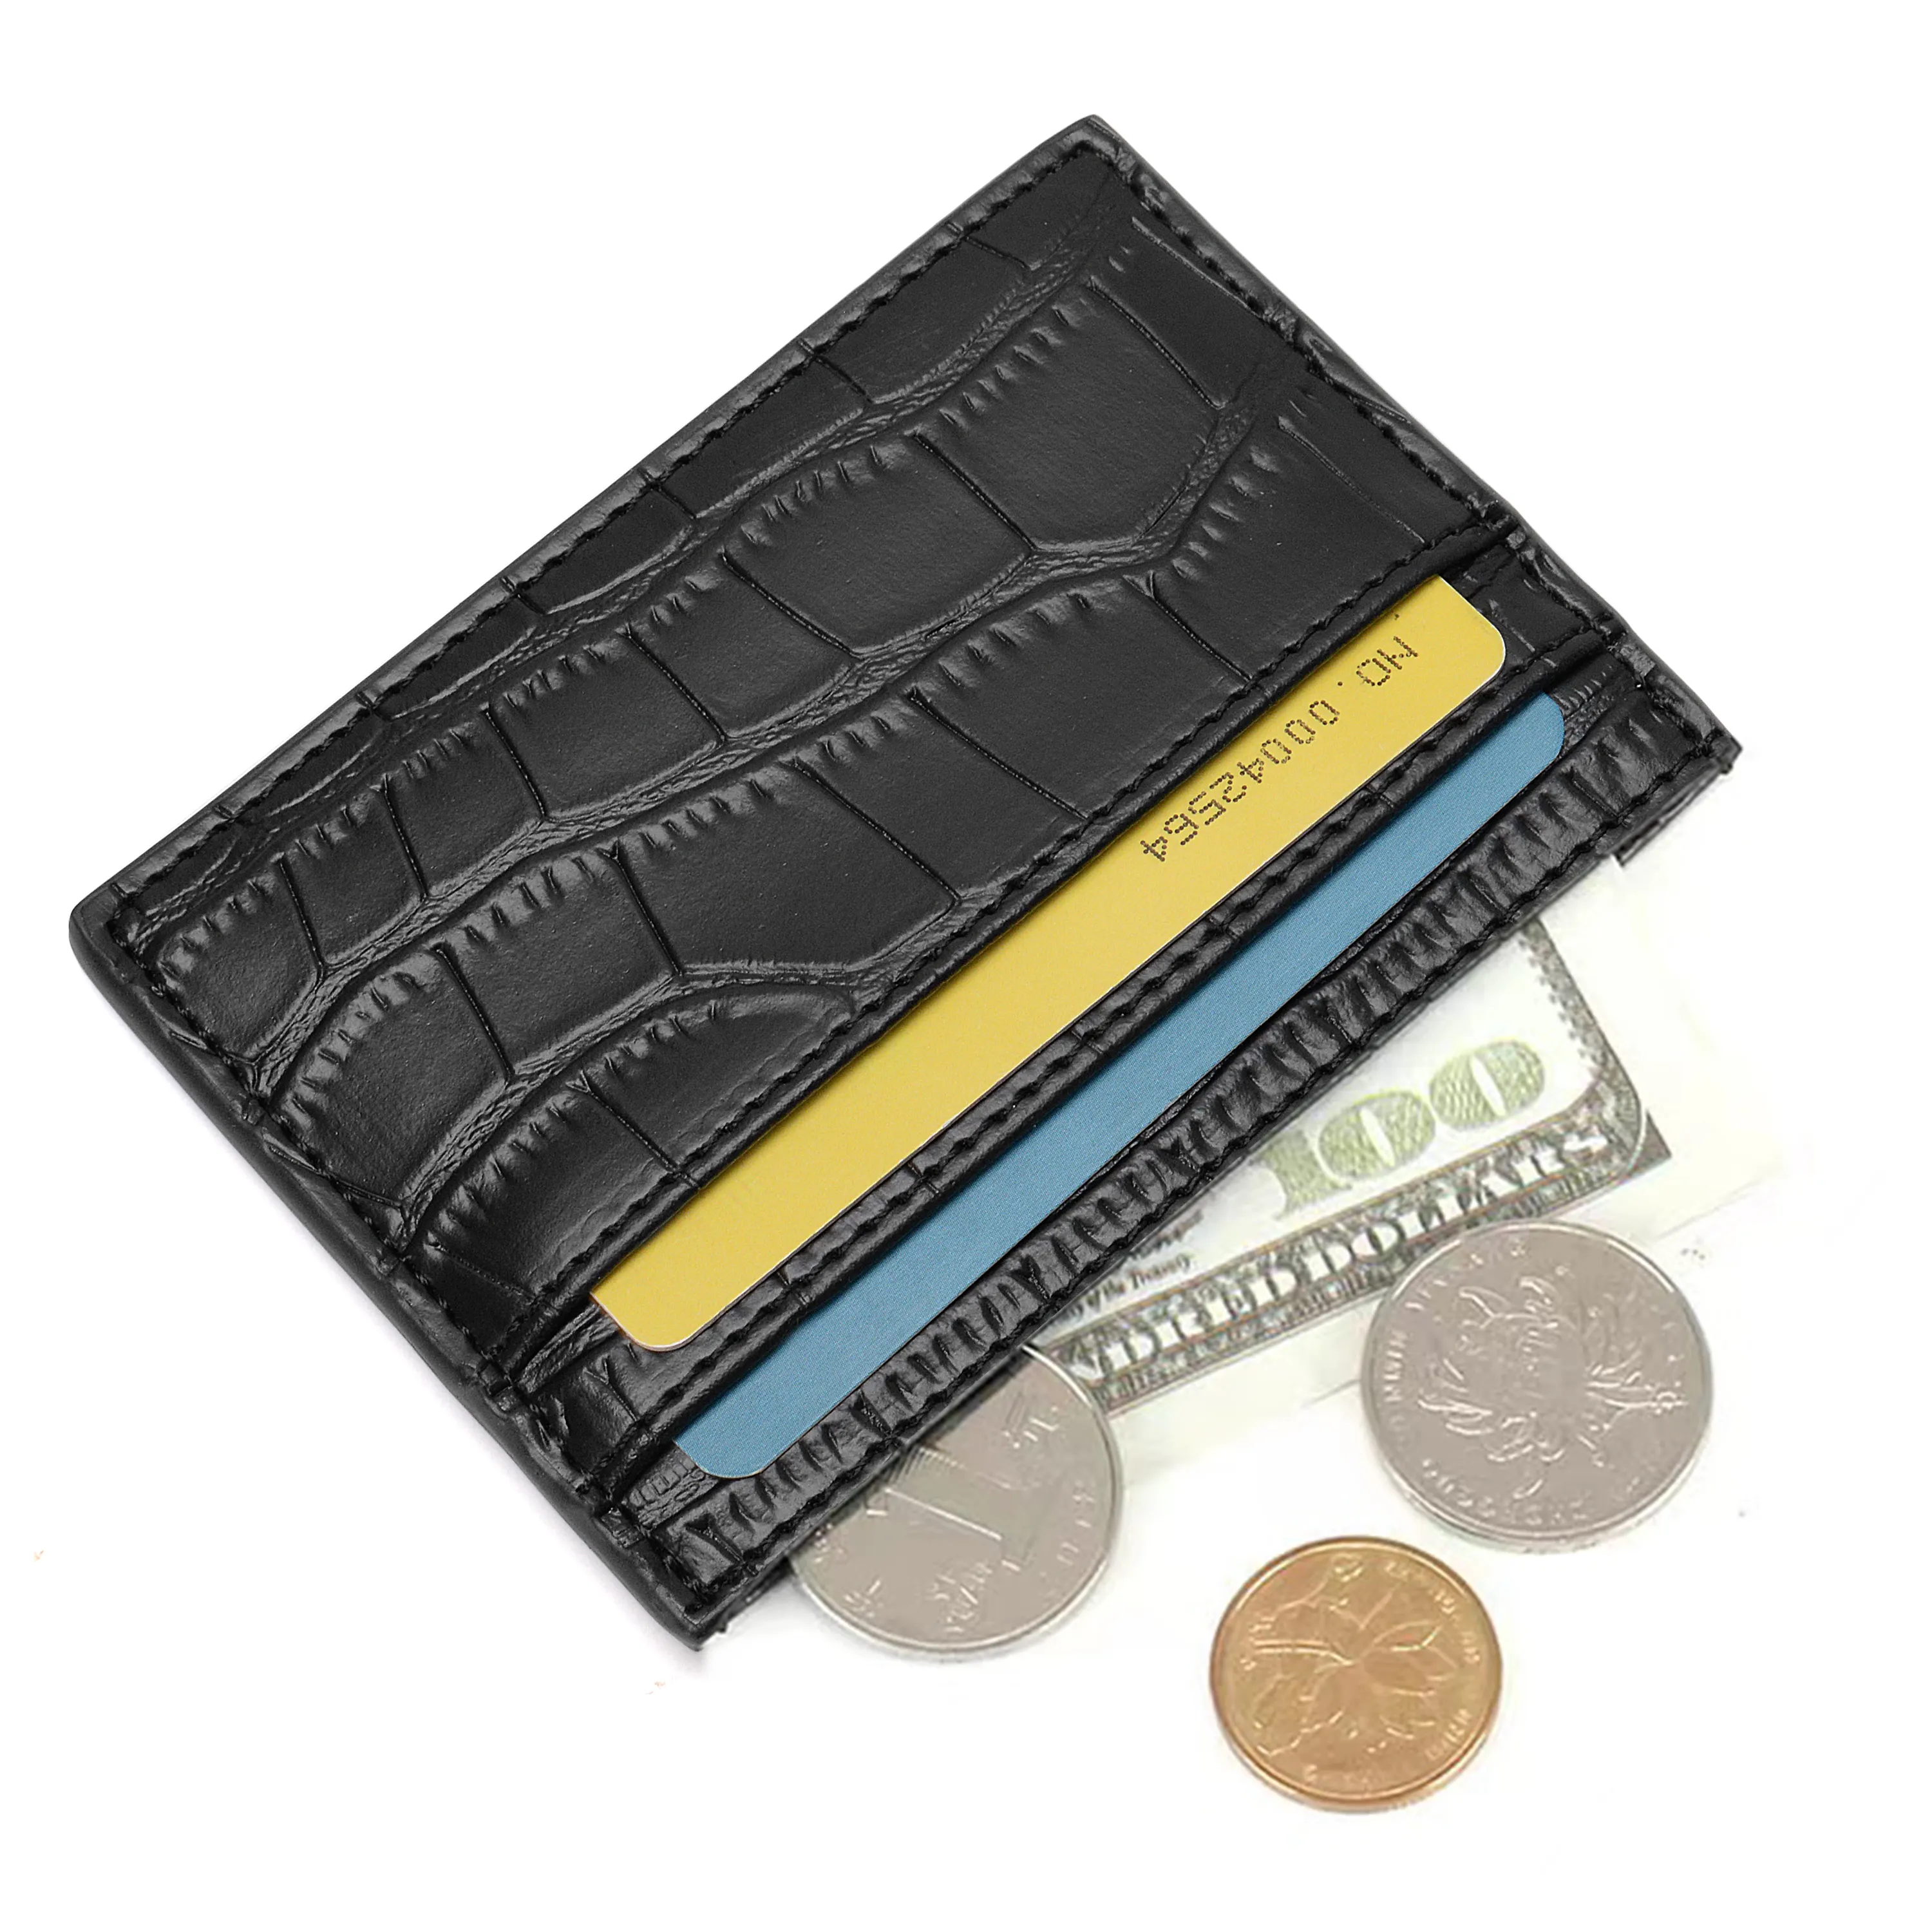 Alligator print Men's Leather Wallet Bifold Wallet For Business Trip With Money Clip with RFID Blocking Technology Cardholder